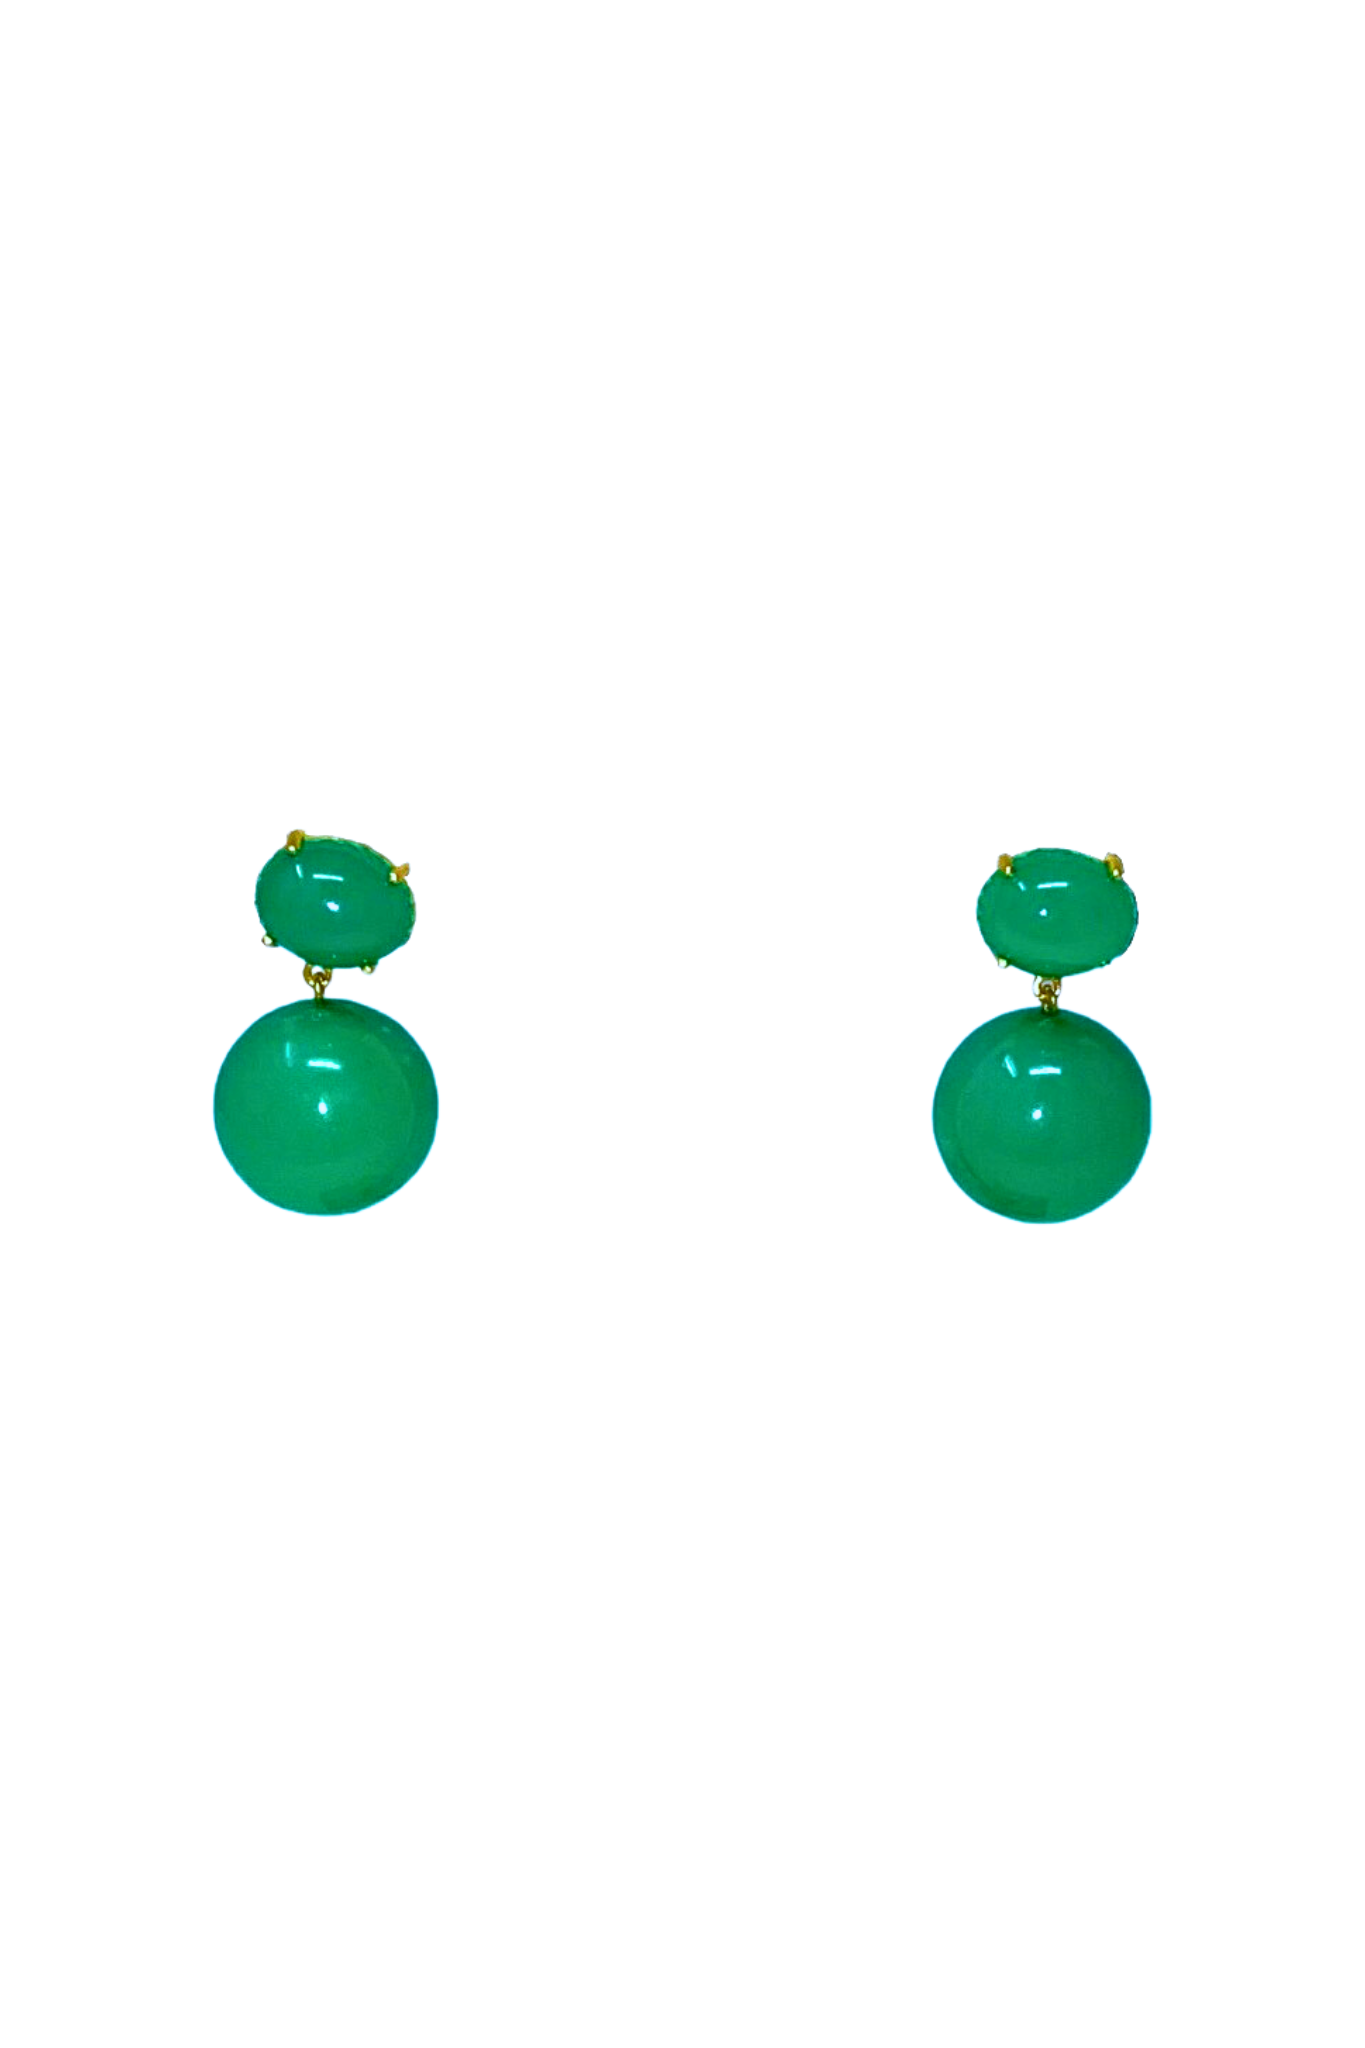 Irene Neuwirth Gumball 18k Yellow Gold Post Earring set with 11x9 Chrysoprase Oval Cabochons and 16mm Chrysoprase Spheres